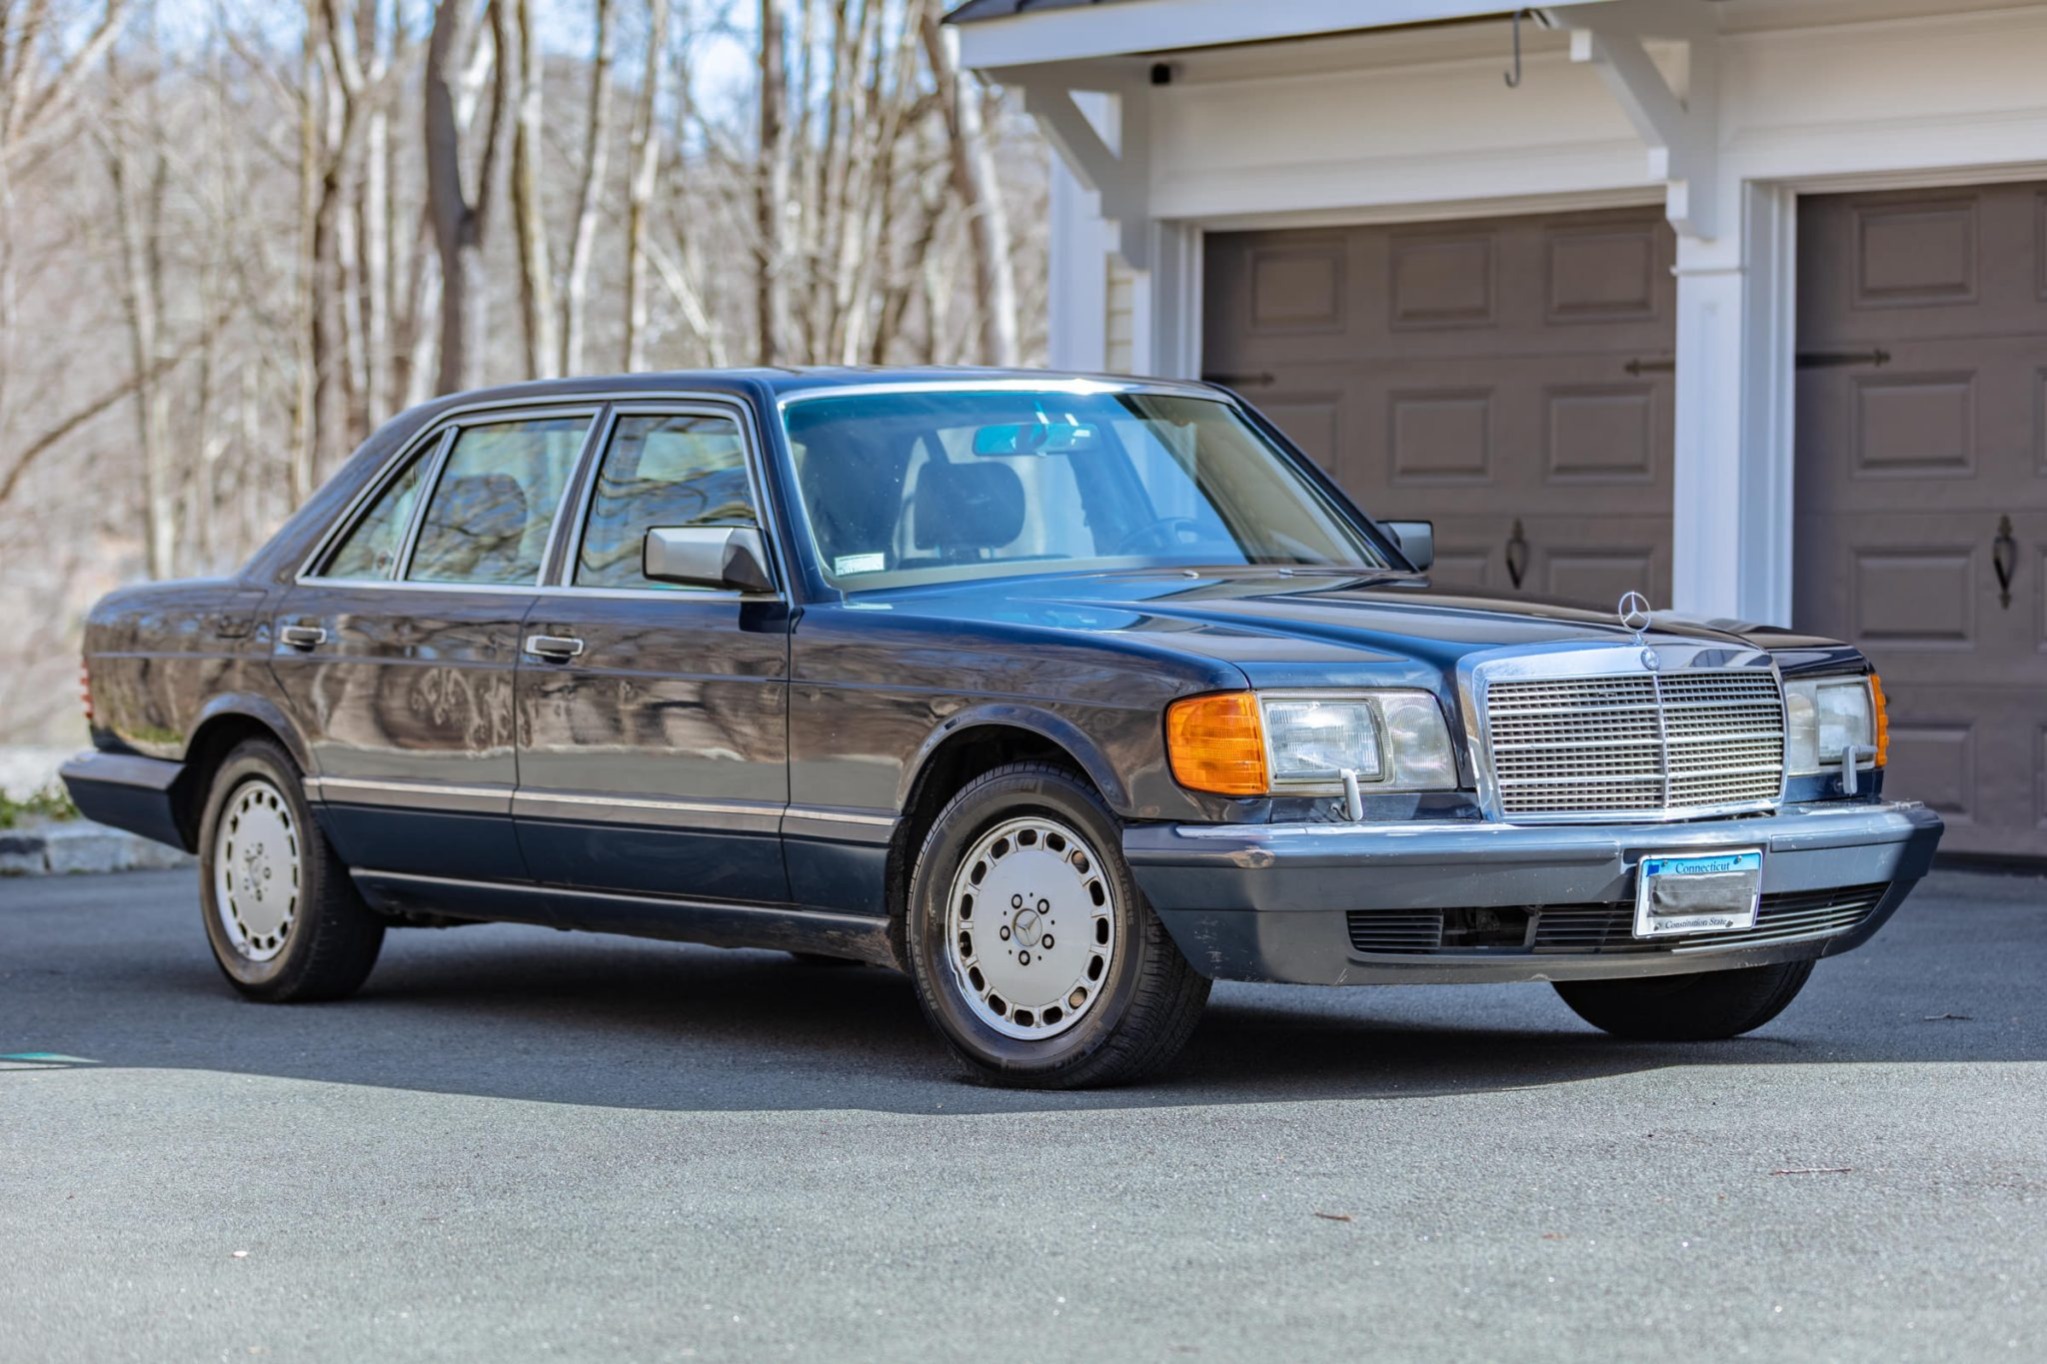 Used Single-Family-Owned 1991 Mercedes-Benz 420SEL Review